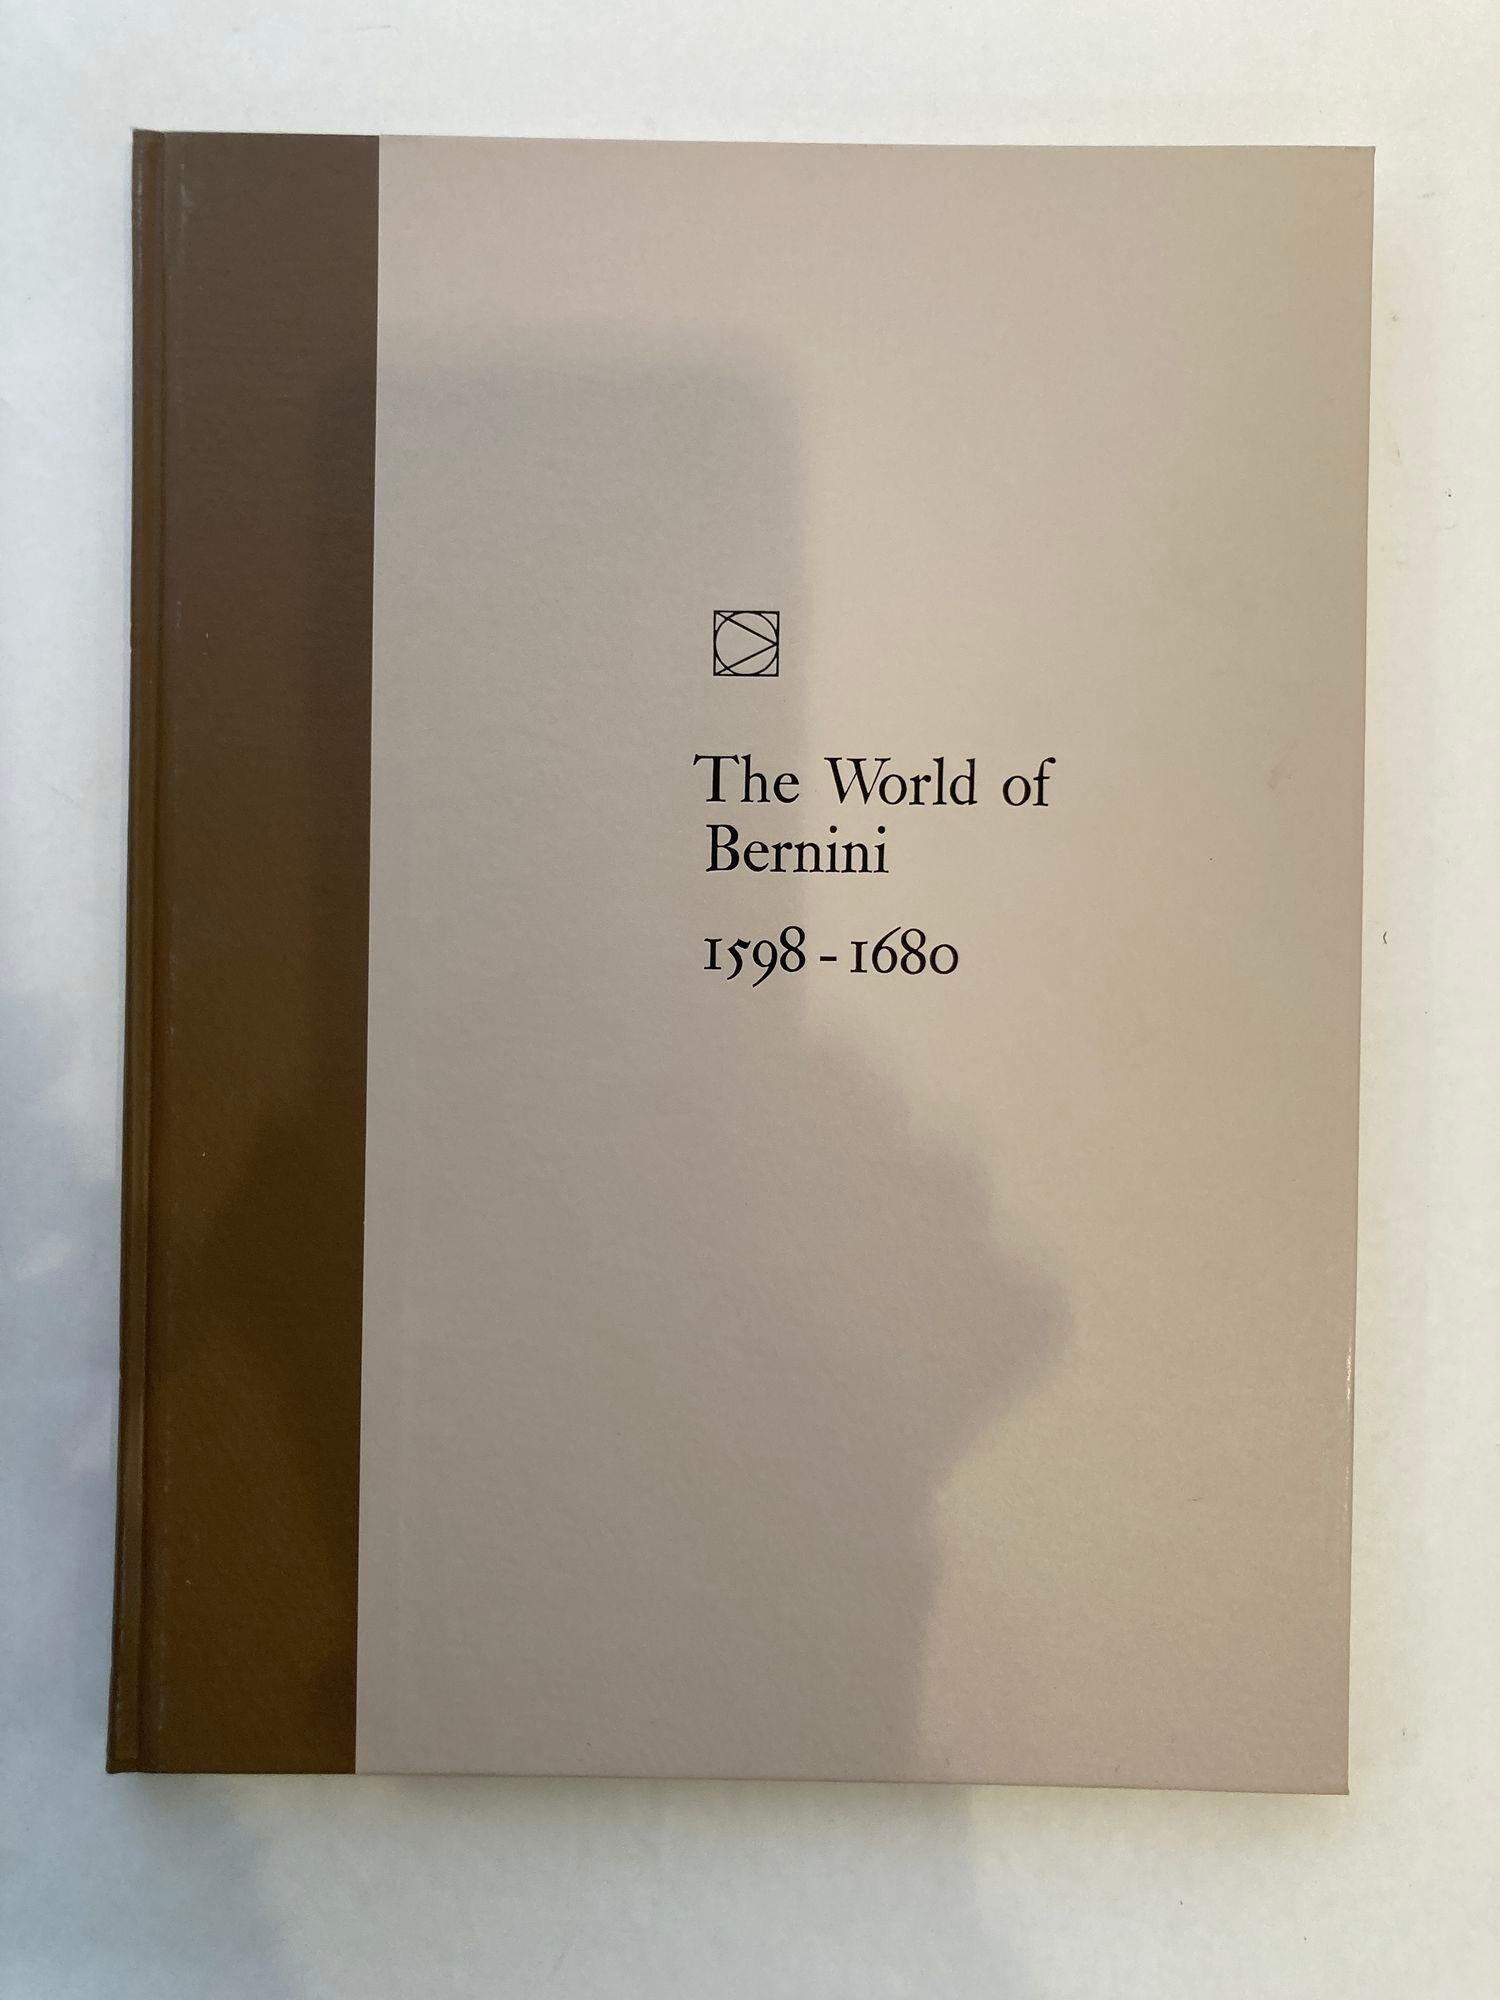 World of Bernini 1598-1680 by Robert Wallace Hardcover Book in Sleeve For Sale 4